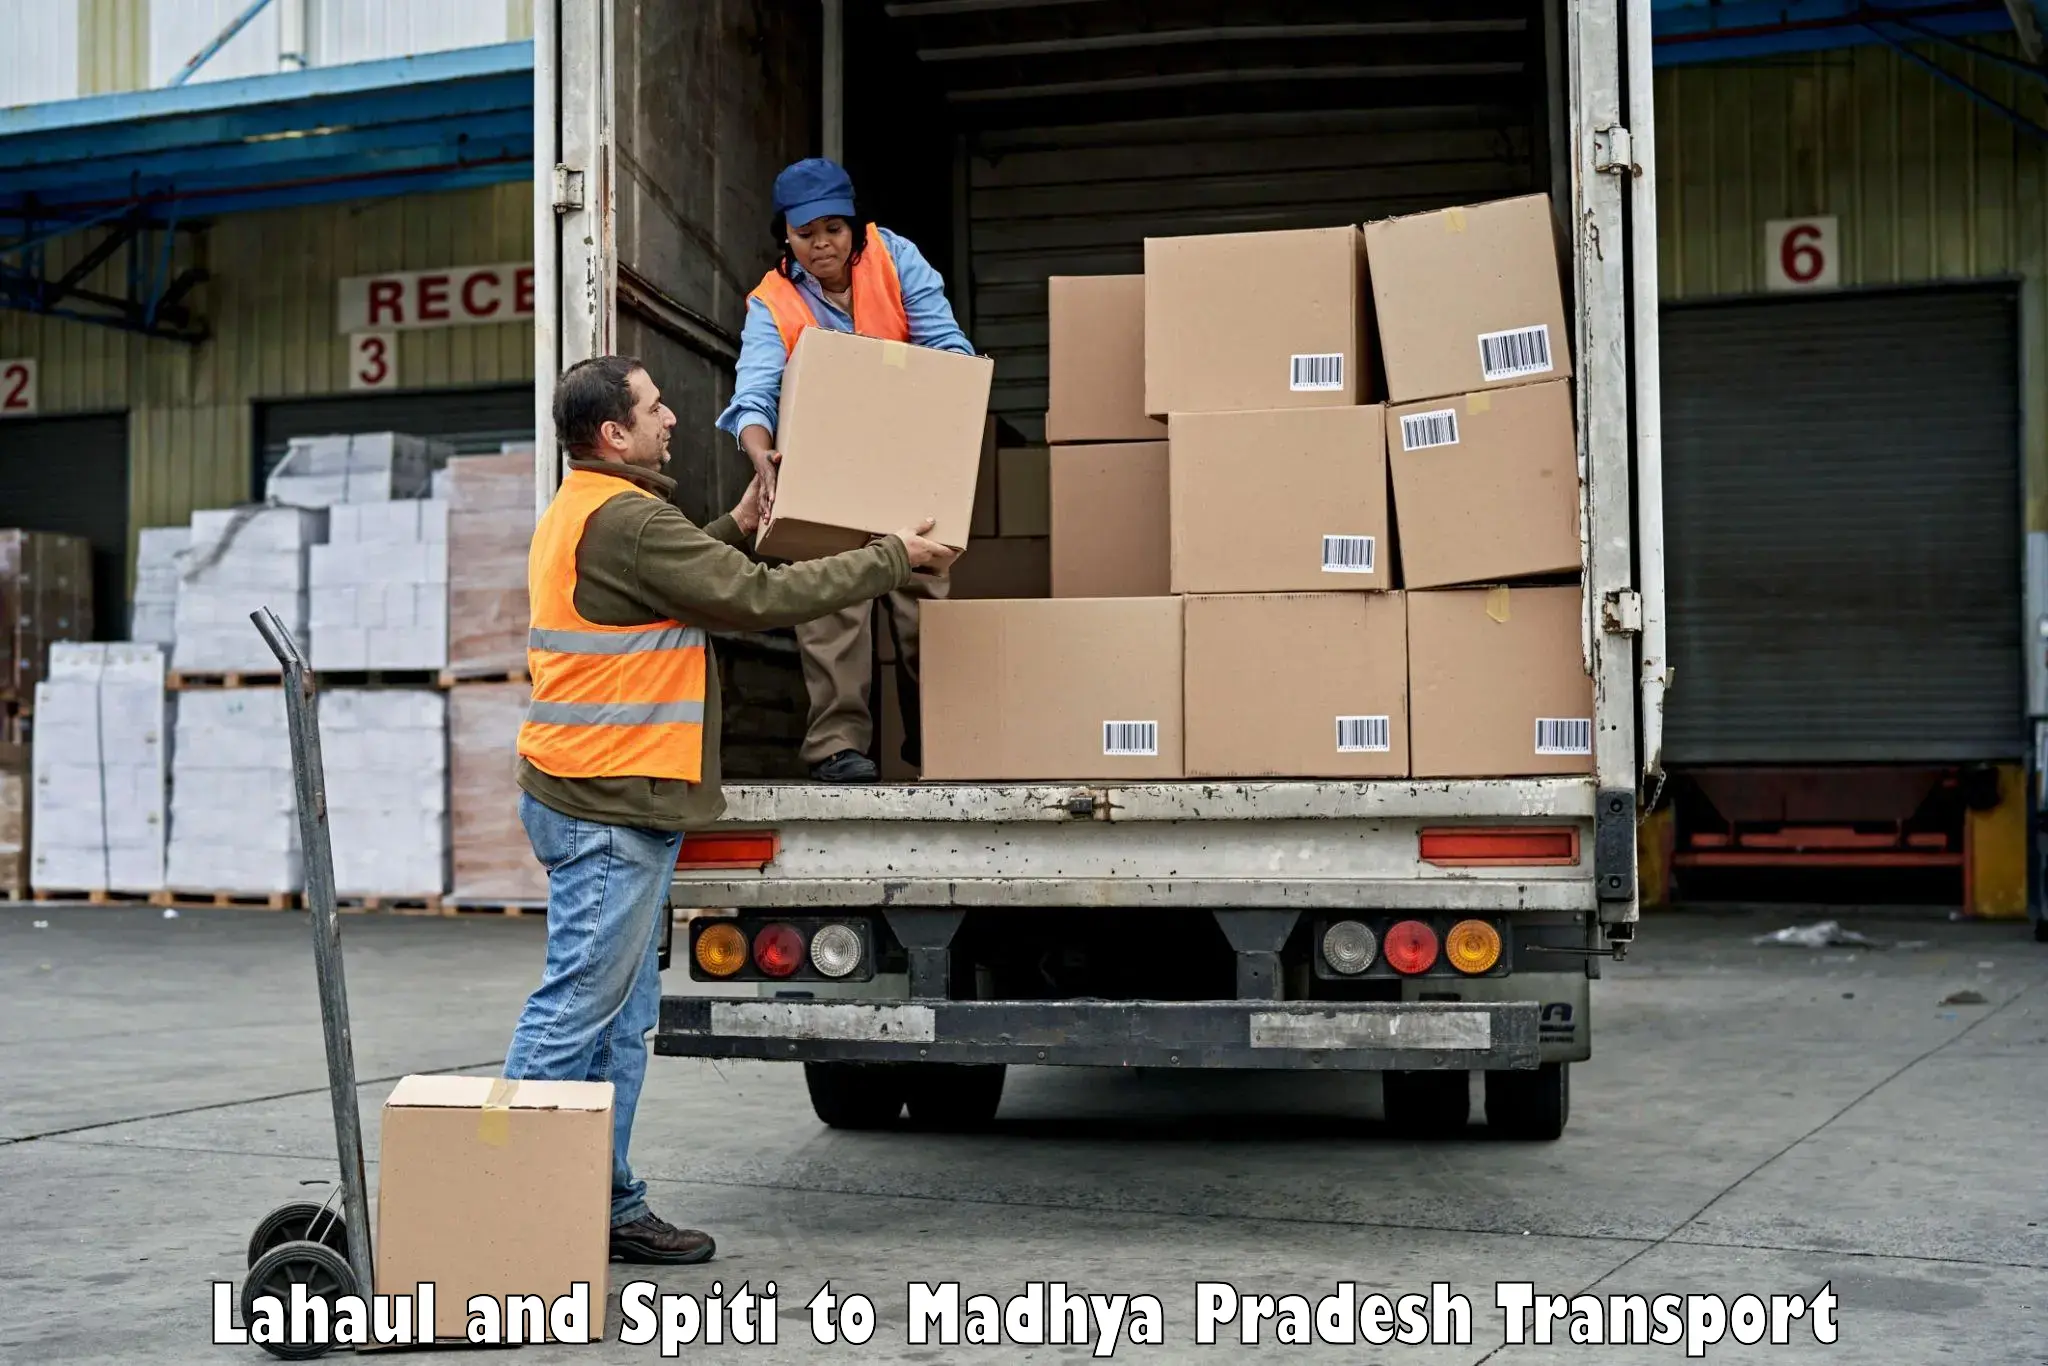 Part load transport service in India Lahaul and Spiti to Niwari